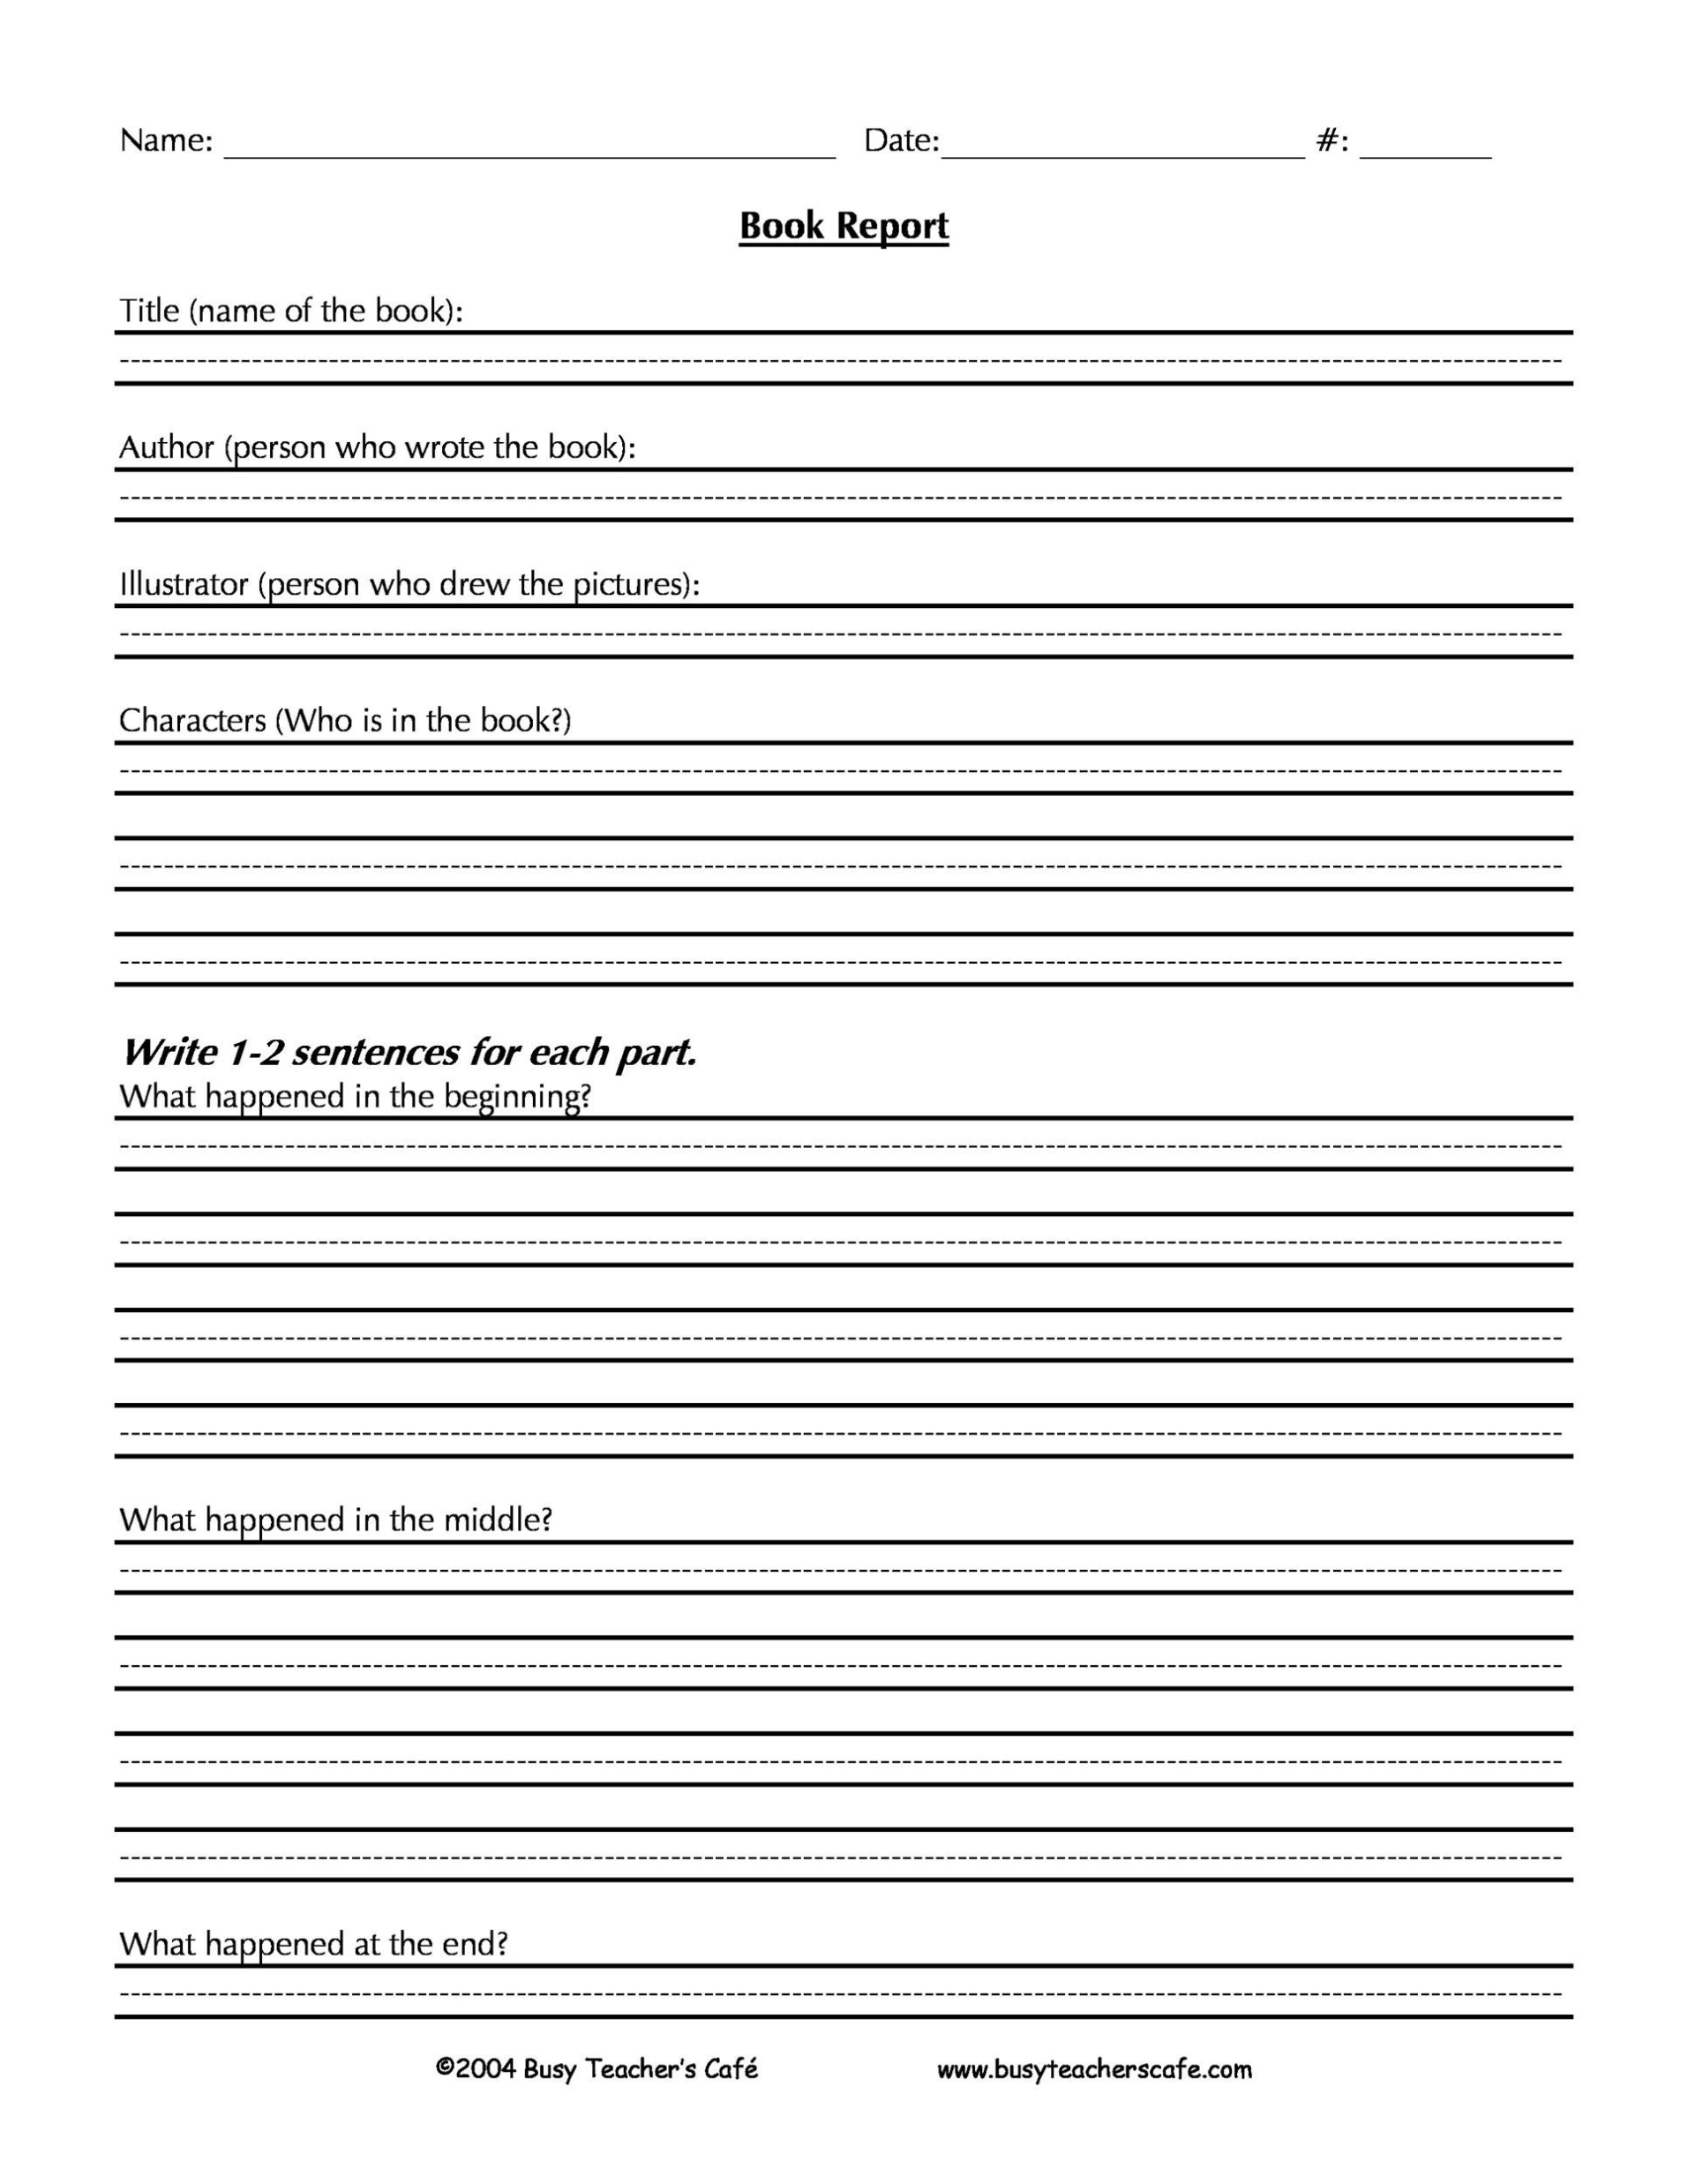 30 Book Report Templates & Reading Worksheets Throughout Quick Book Reports Templates